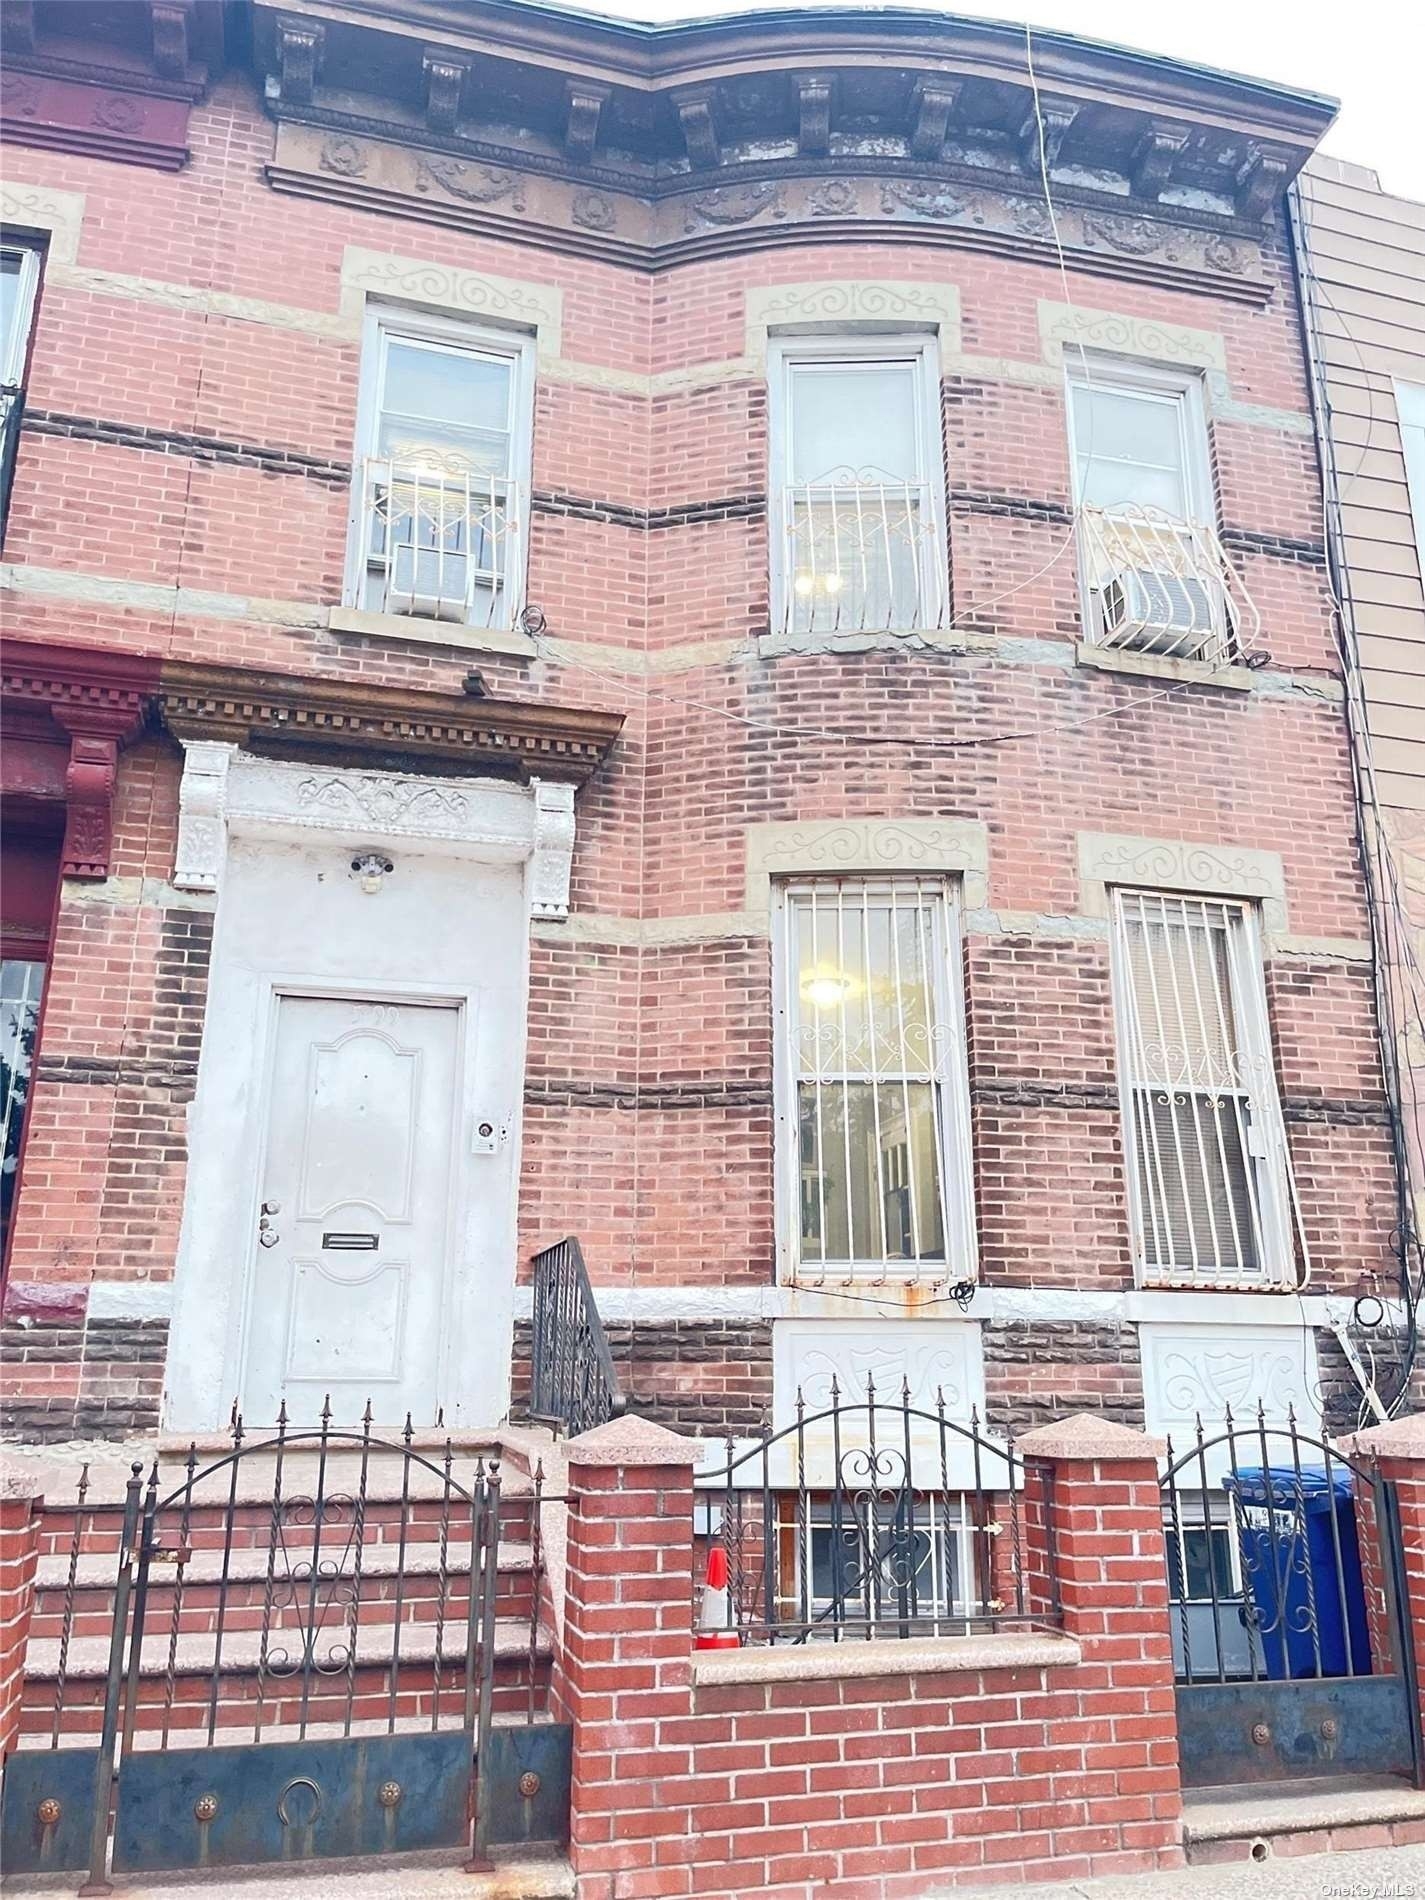 Multi Family Townhouse for Sale at Bushwick, Brooklyn, NY 11221